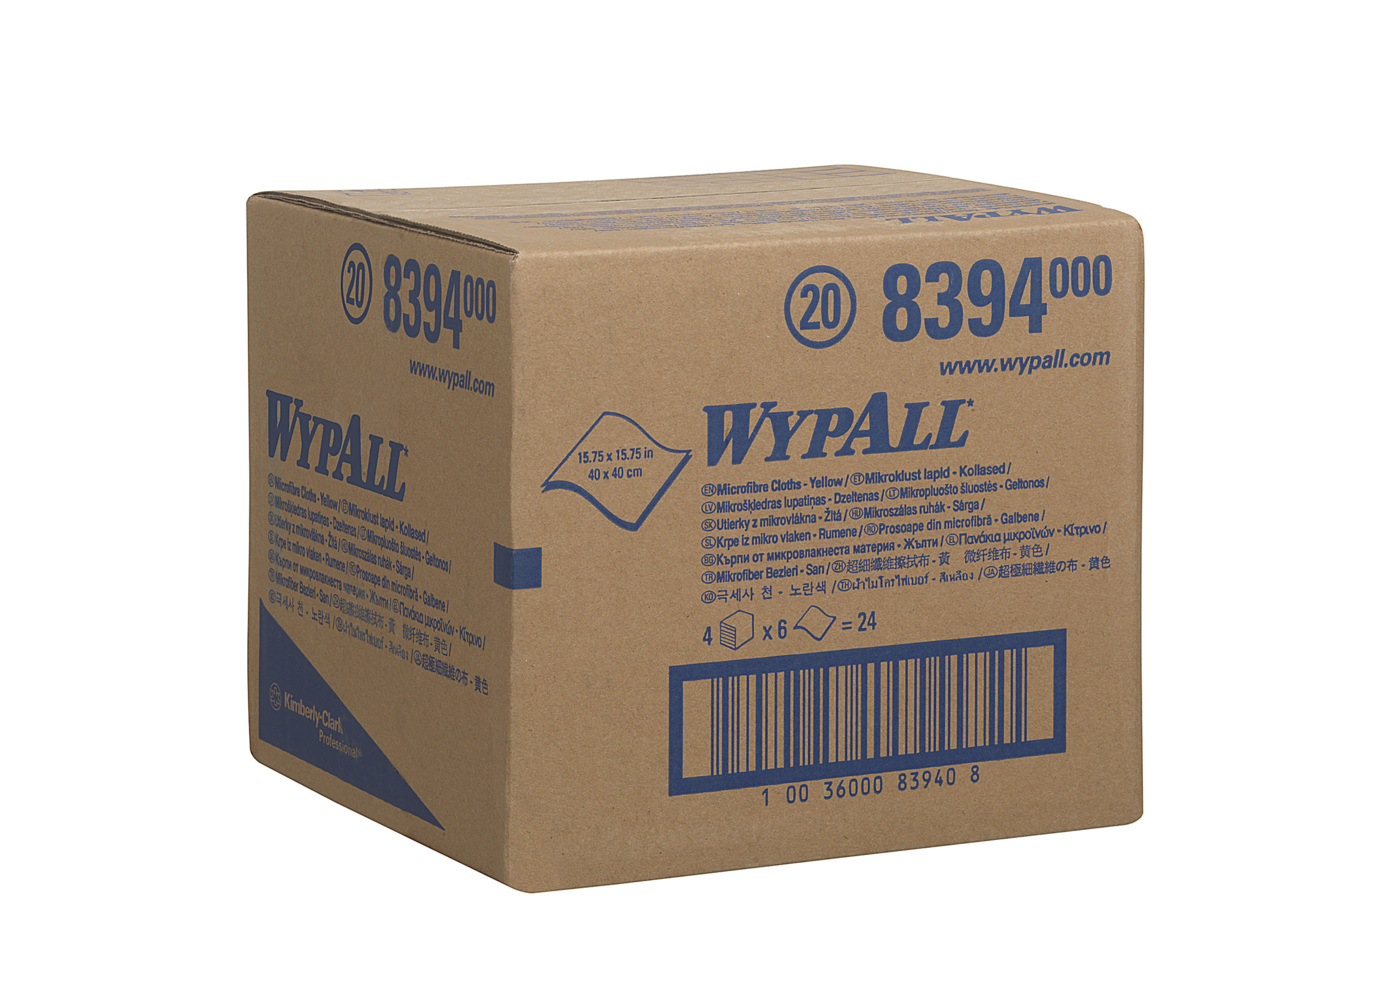 WypAll® Microfibre Cloths 8394 - 4 carry packs x 6 yellow, 40 x 40cm cloths, yellow (24 total) - 8394